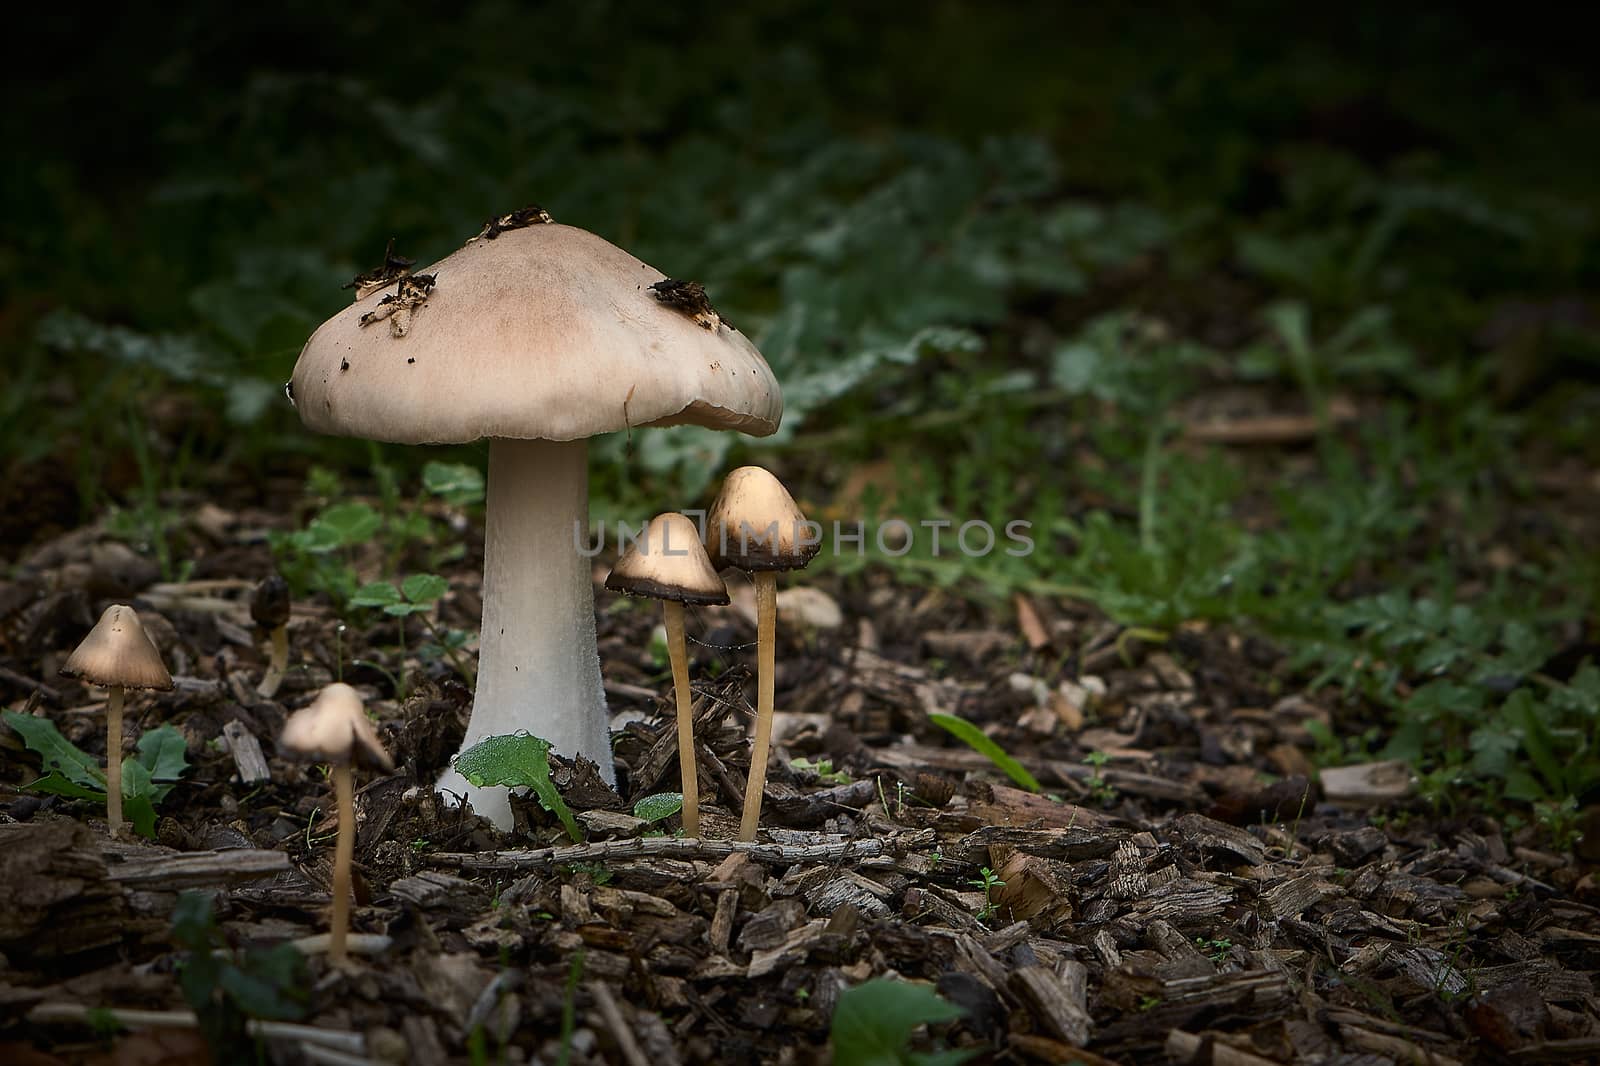 SMALL WILD MUSHROOMS IN THE FOREST by SoniaKarelitz